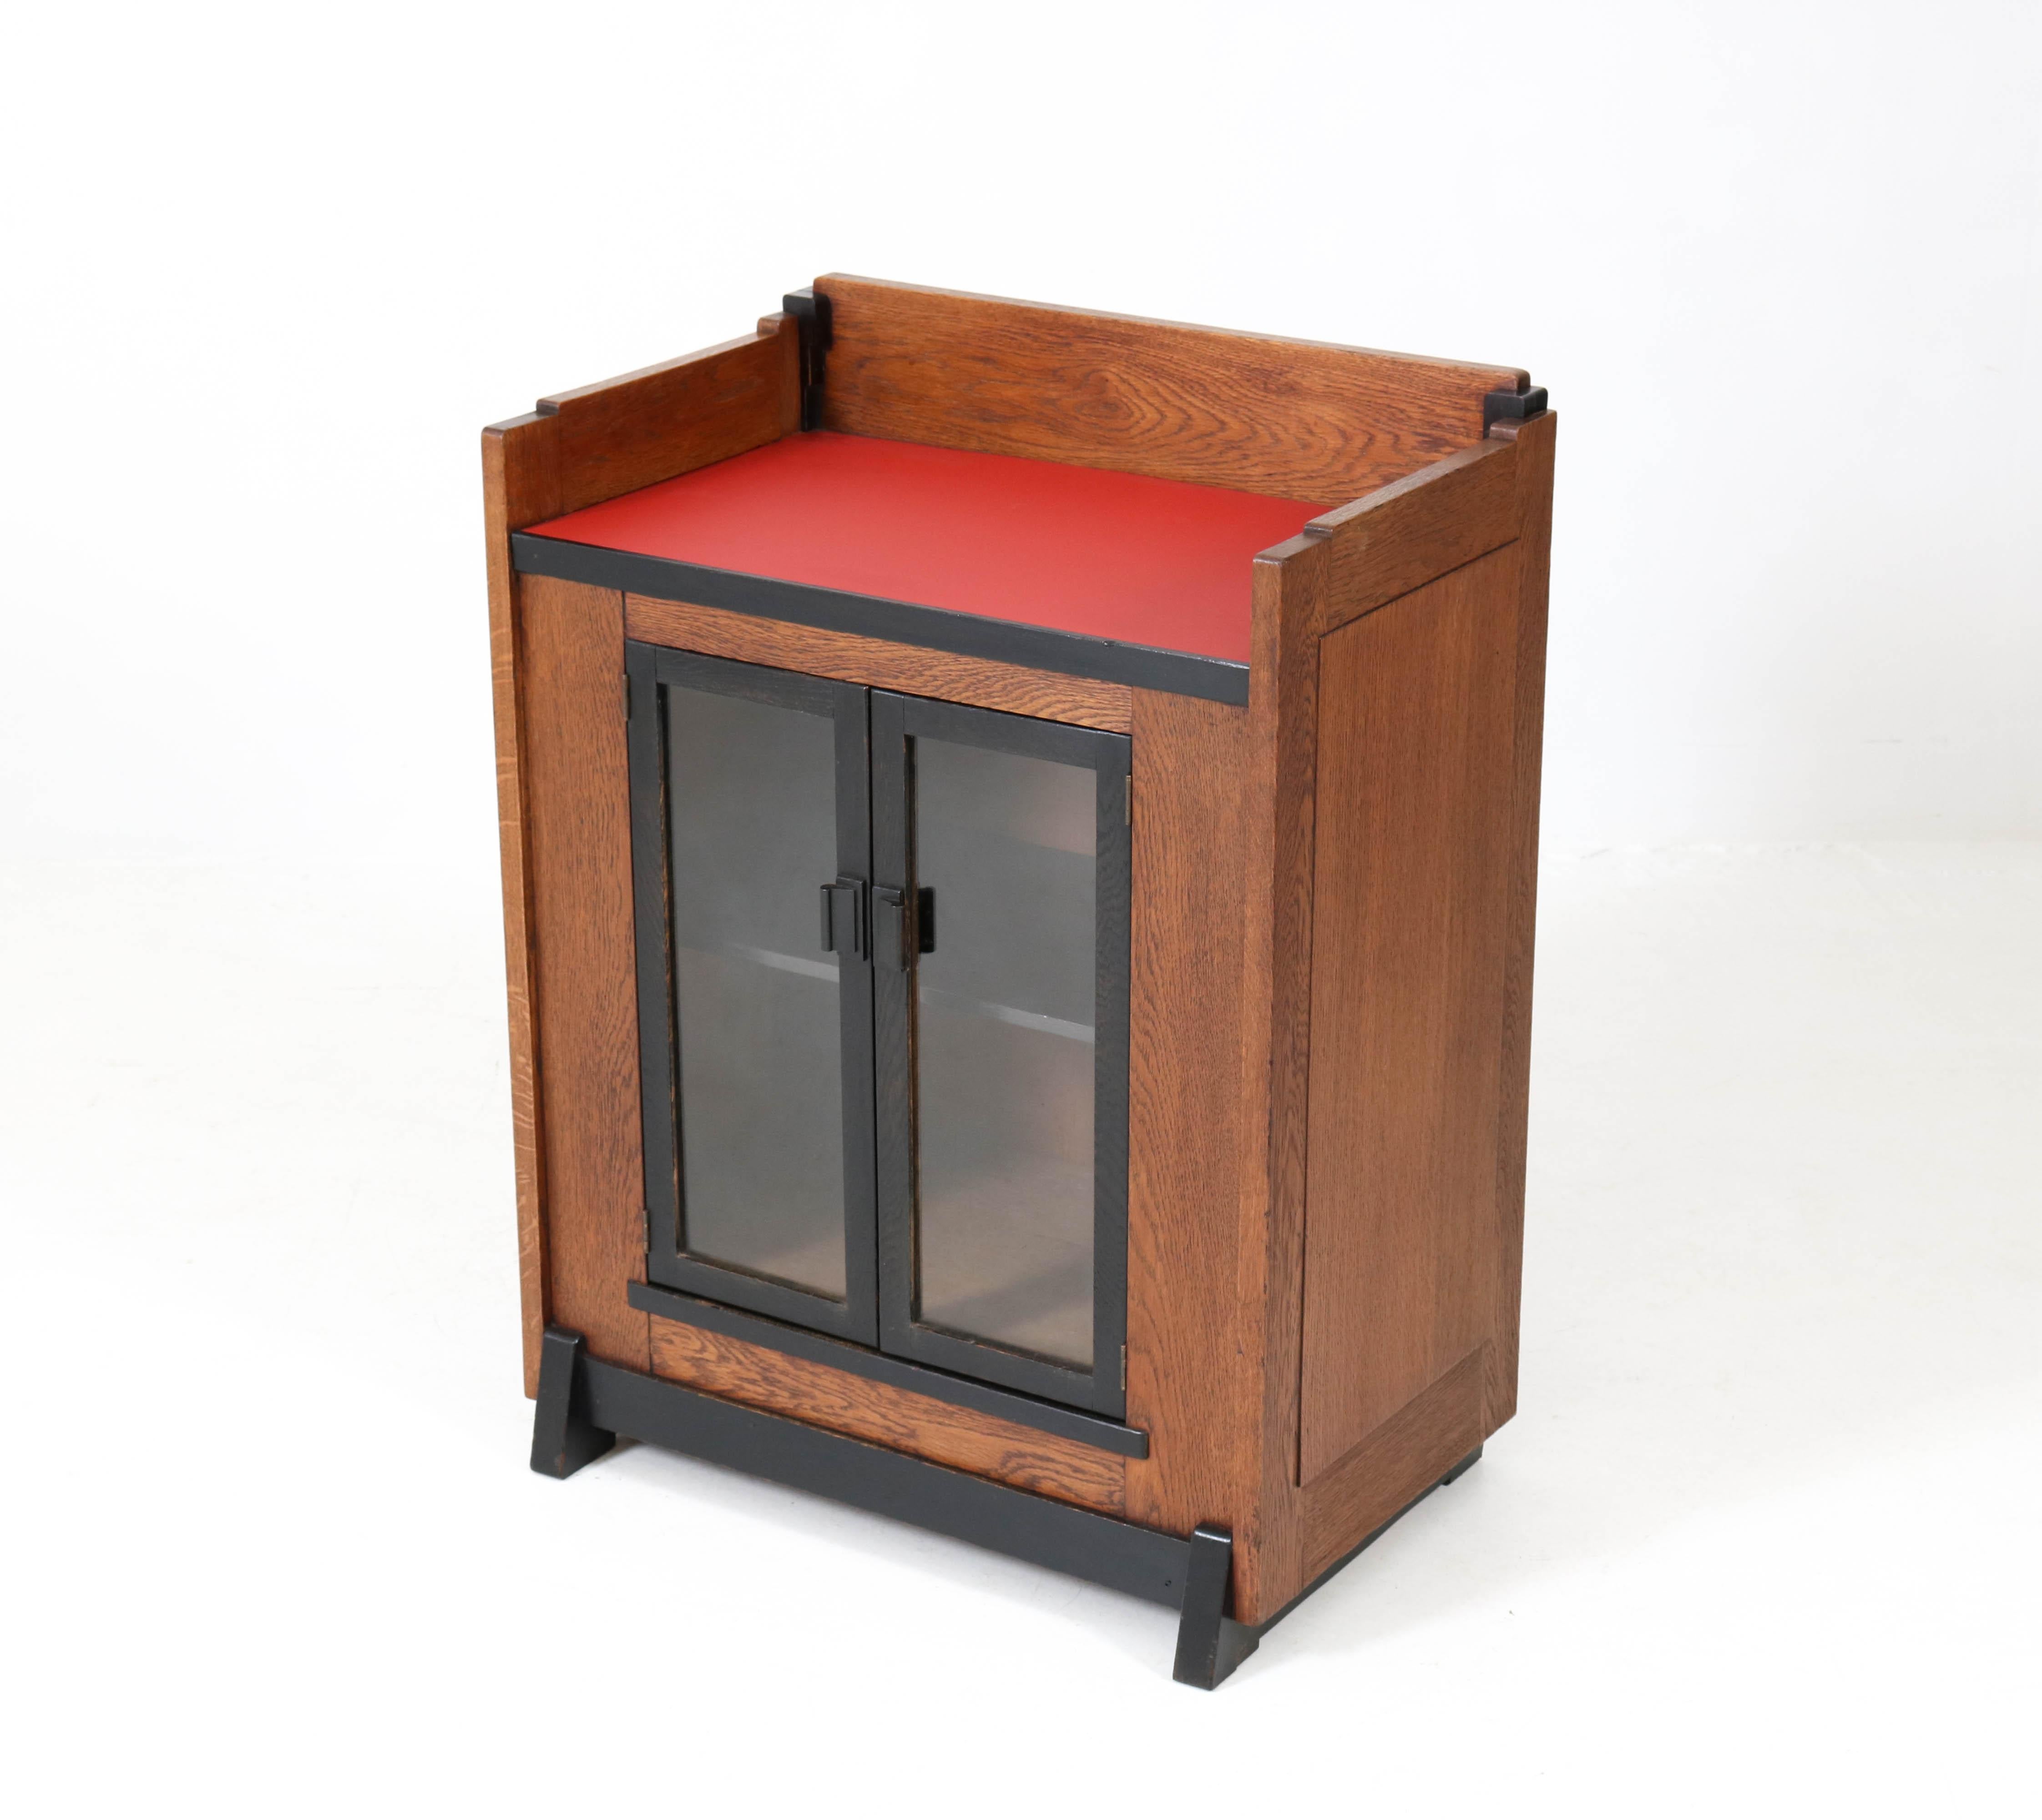 Offered by Amsterdam Modernism:
Rare and hard to find Art Deco Haagse School tea cabinet by Jan Brunott.
Oak with original ebonized lining and red linoleum top.
Striking Dutch design from the twenties.
In good original condition with minor wear